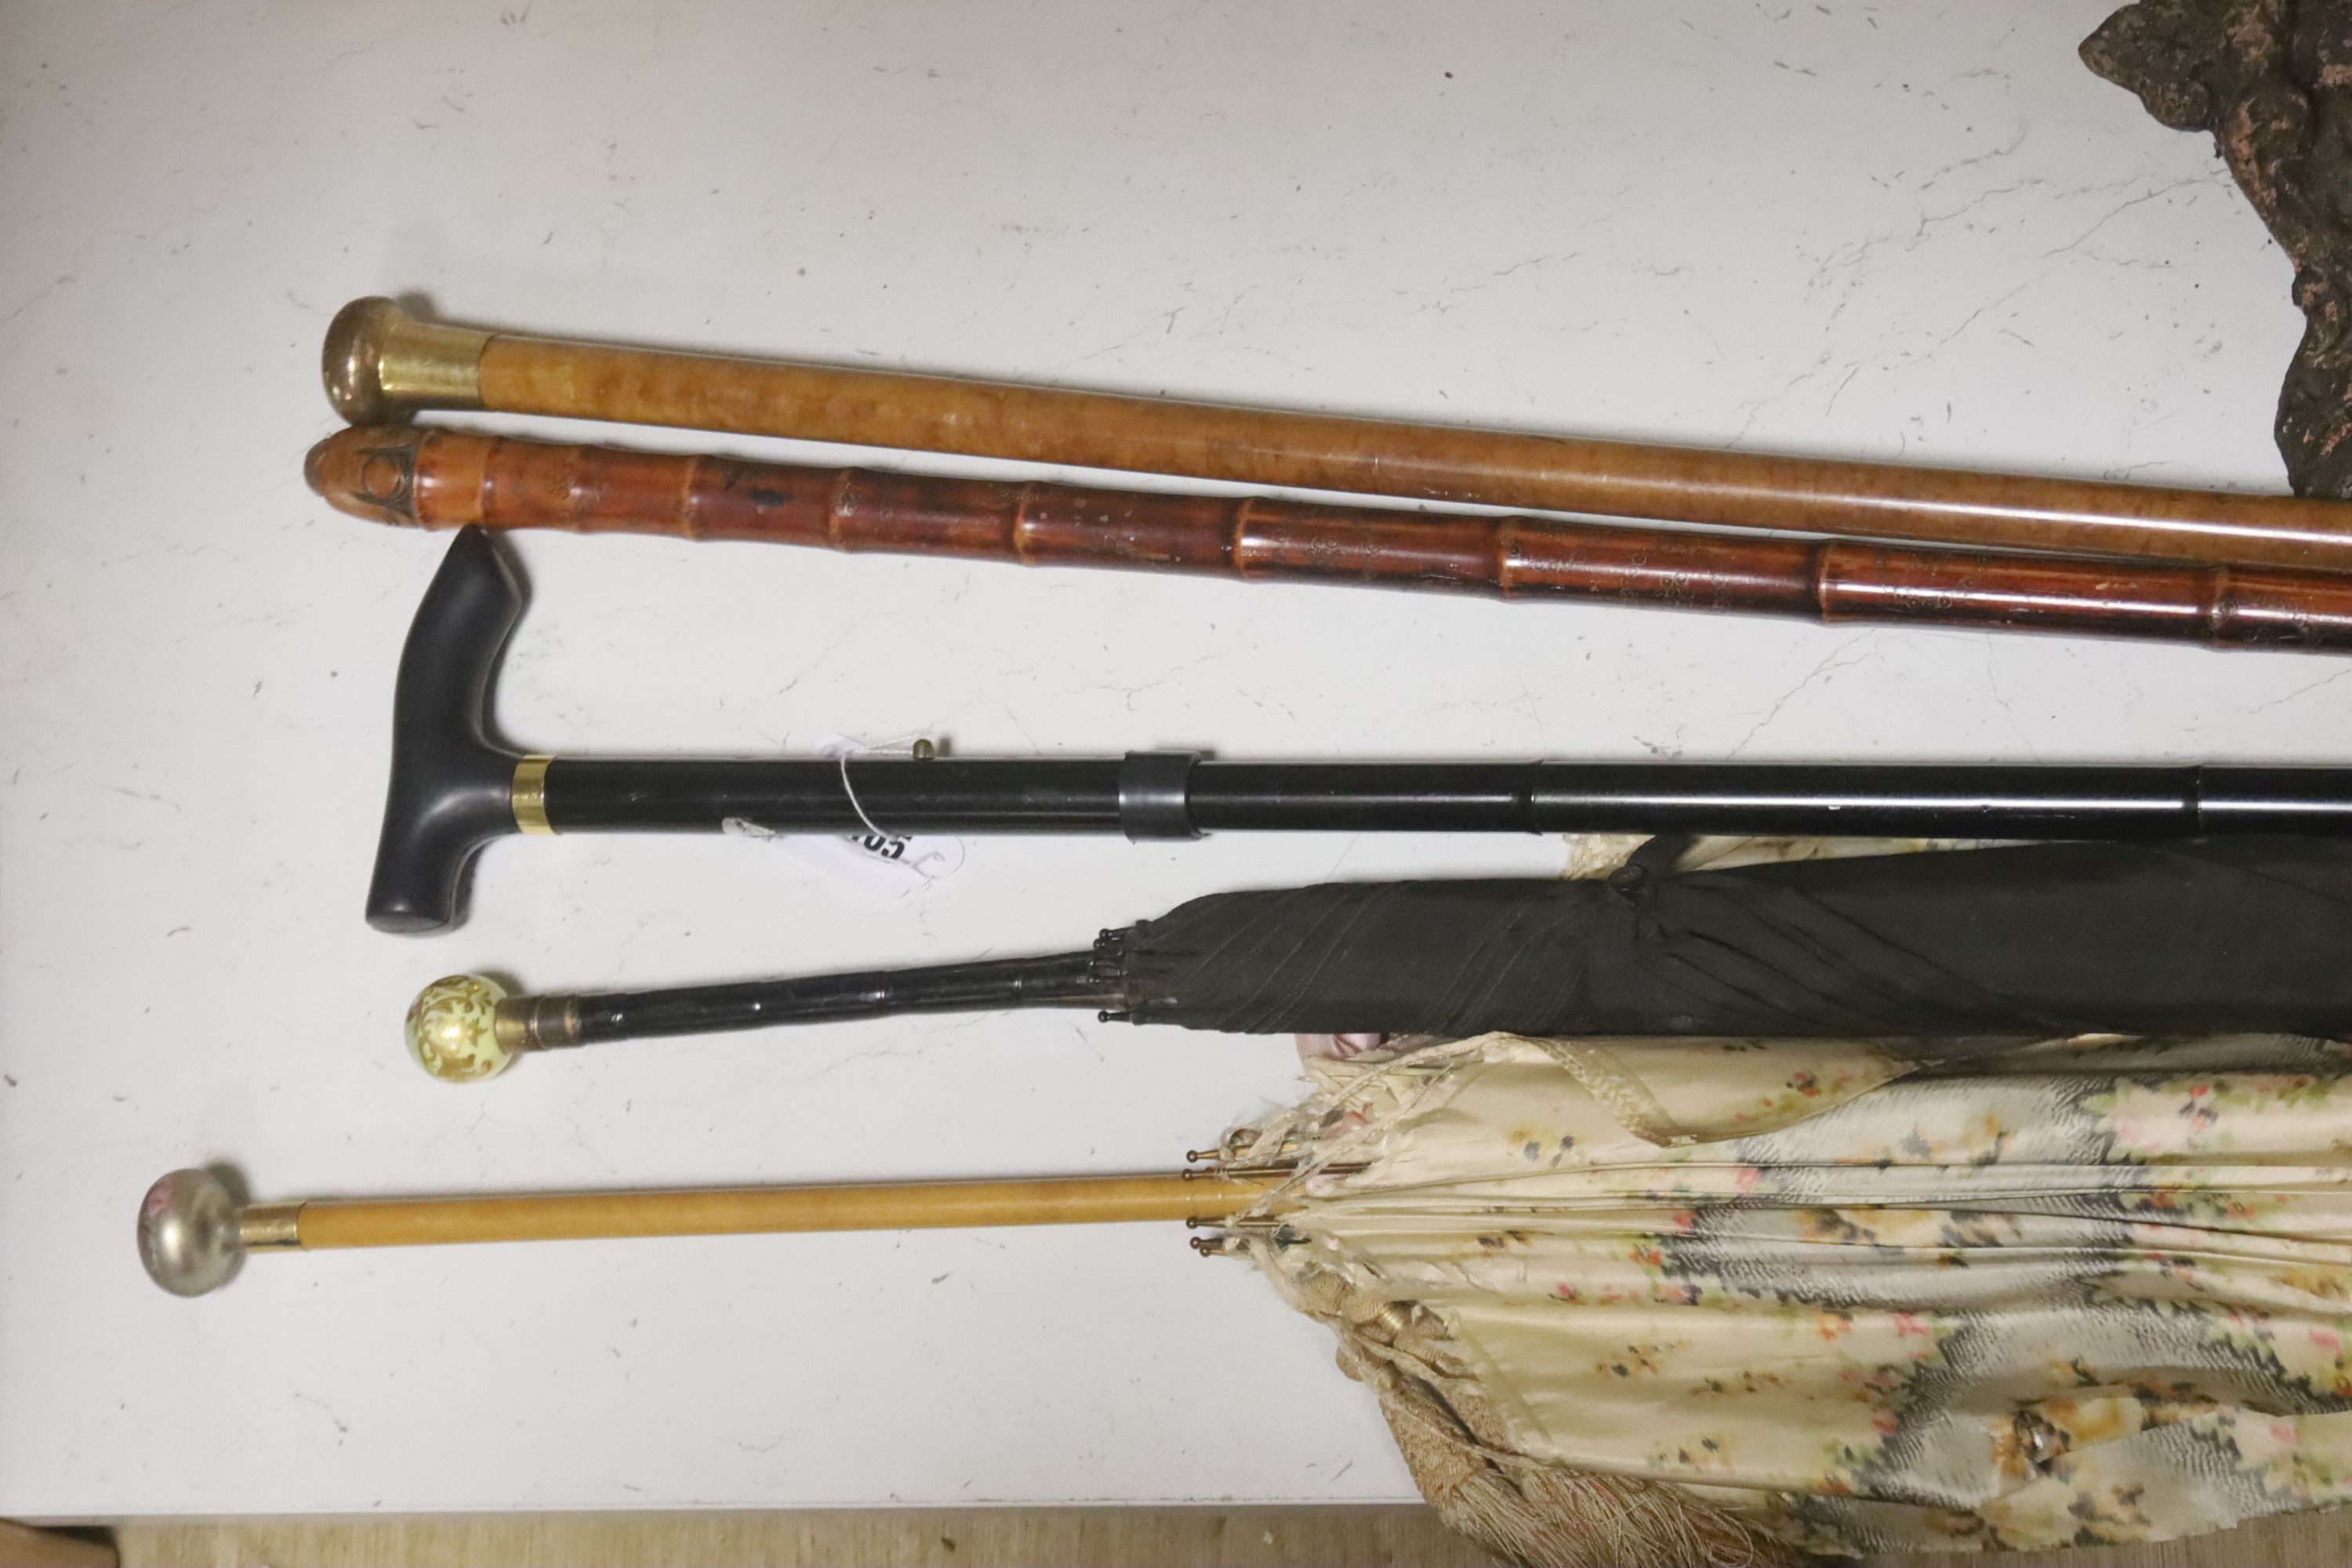 A Chinese bamboo walking stick, two parasols and another stick